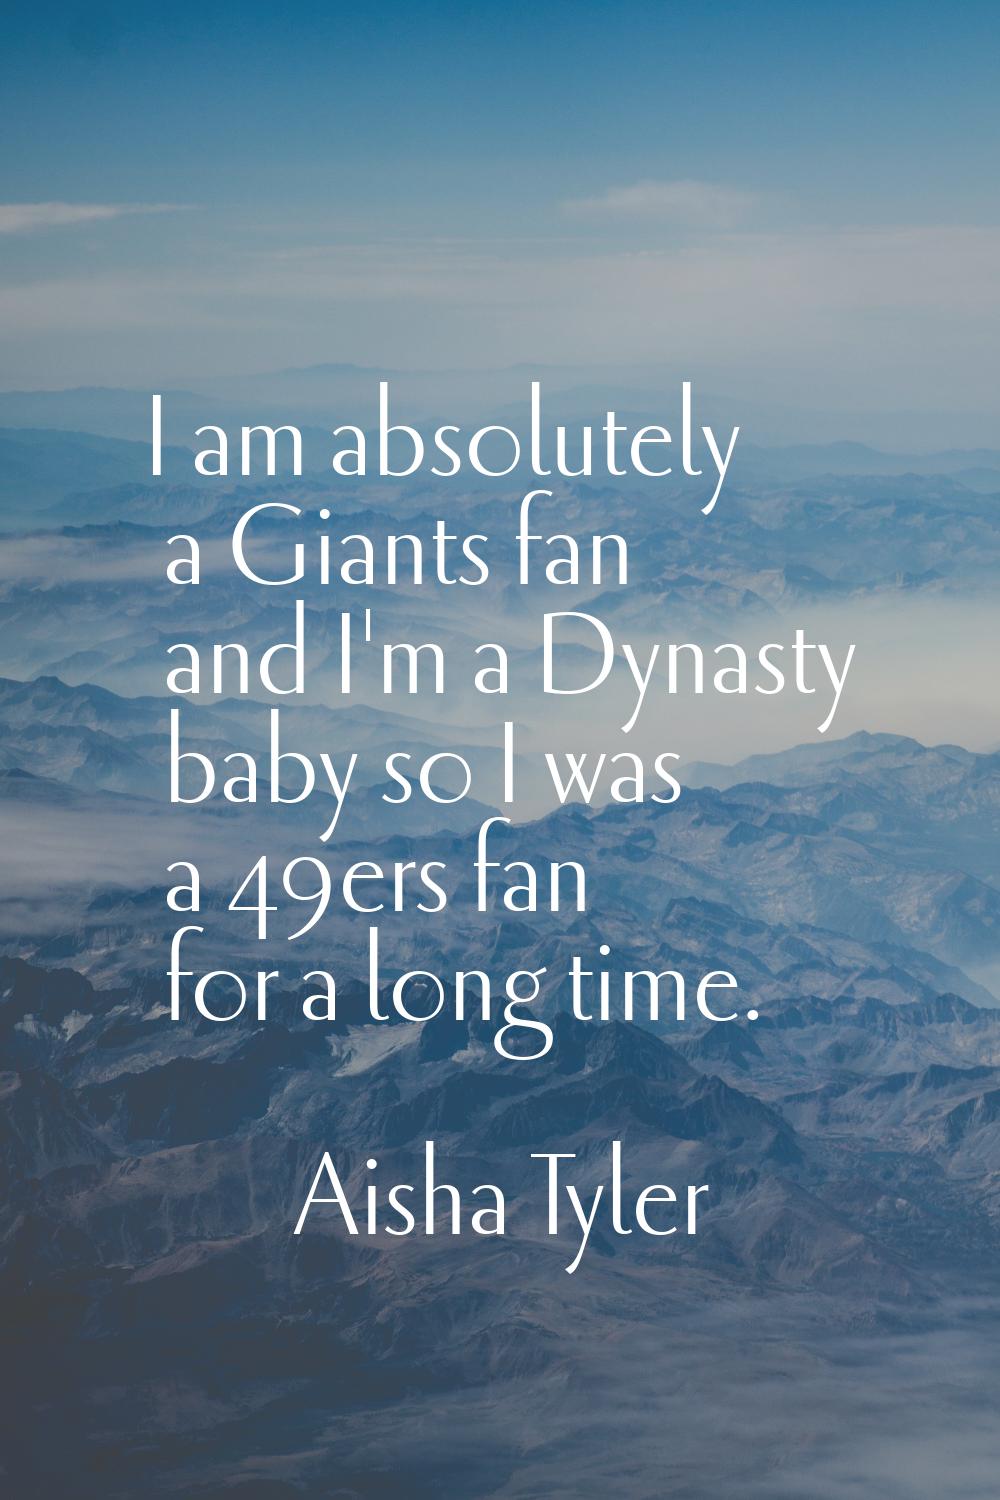 I am absolutely a Giants fan and I'm a Dynasty baby so I was a 49ers fan for a long time.